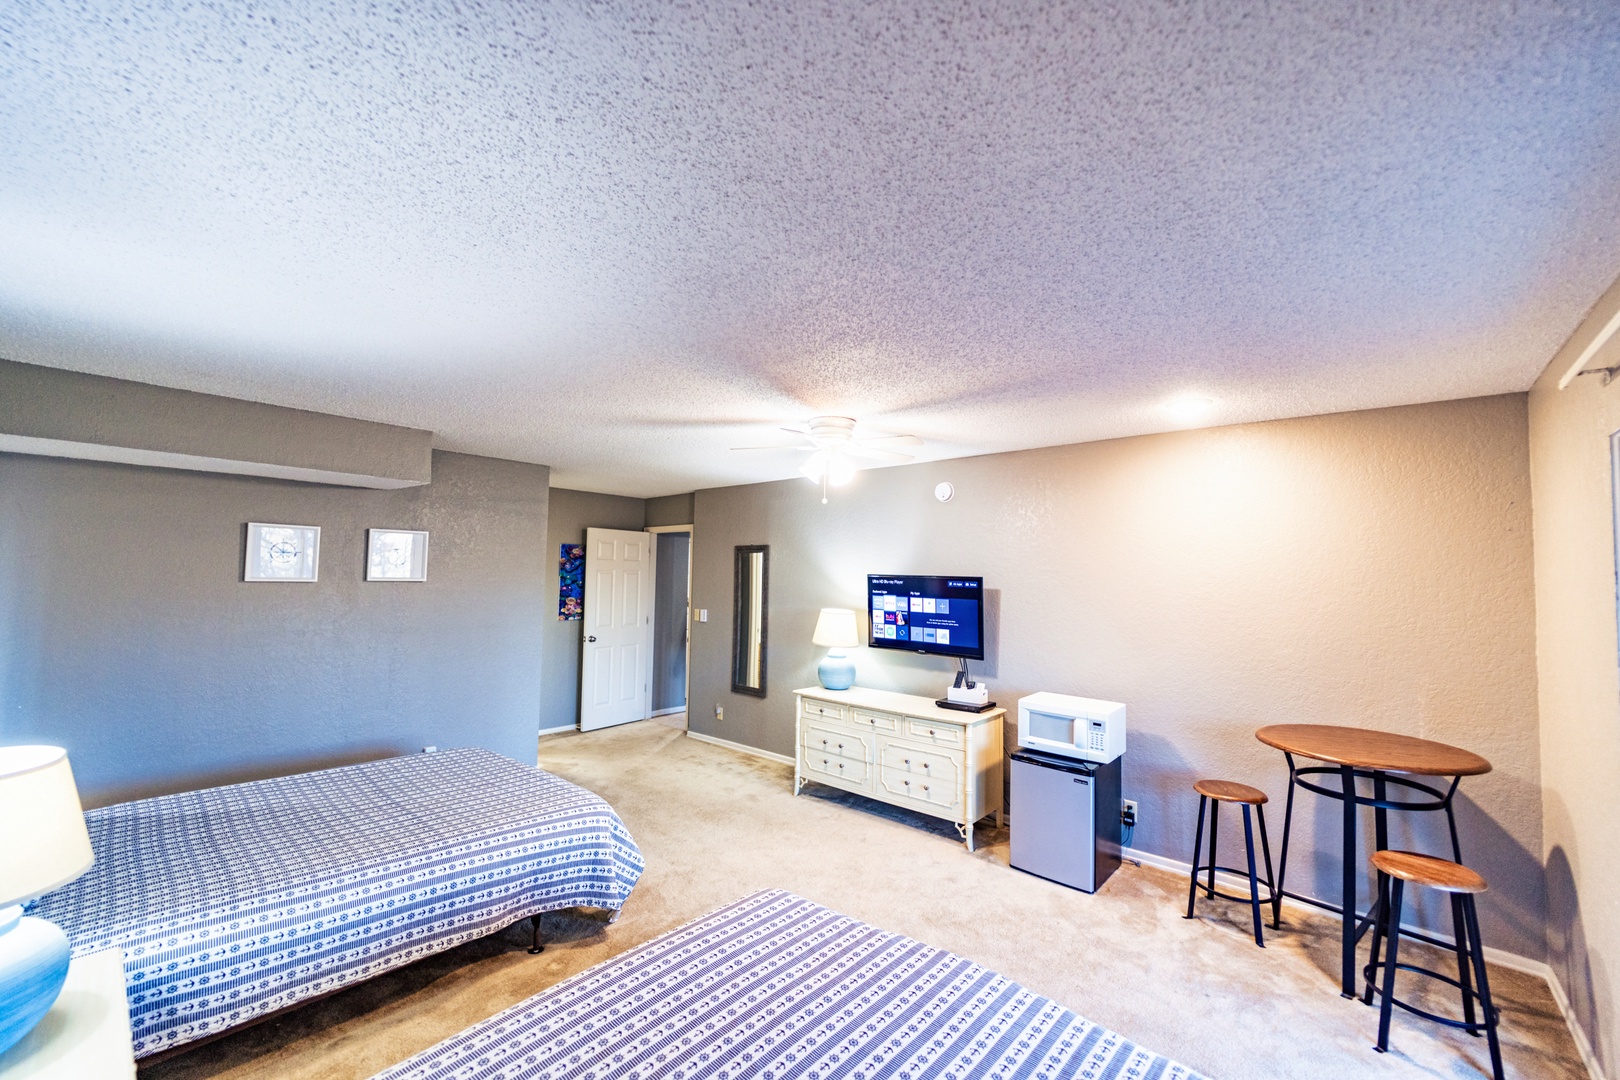 This lower-level suite offers a pair of queen beds, ensuite, Smart TV, & deck access